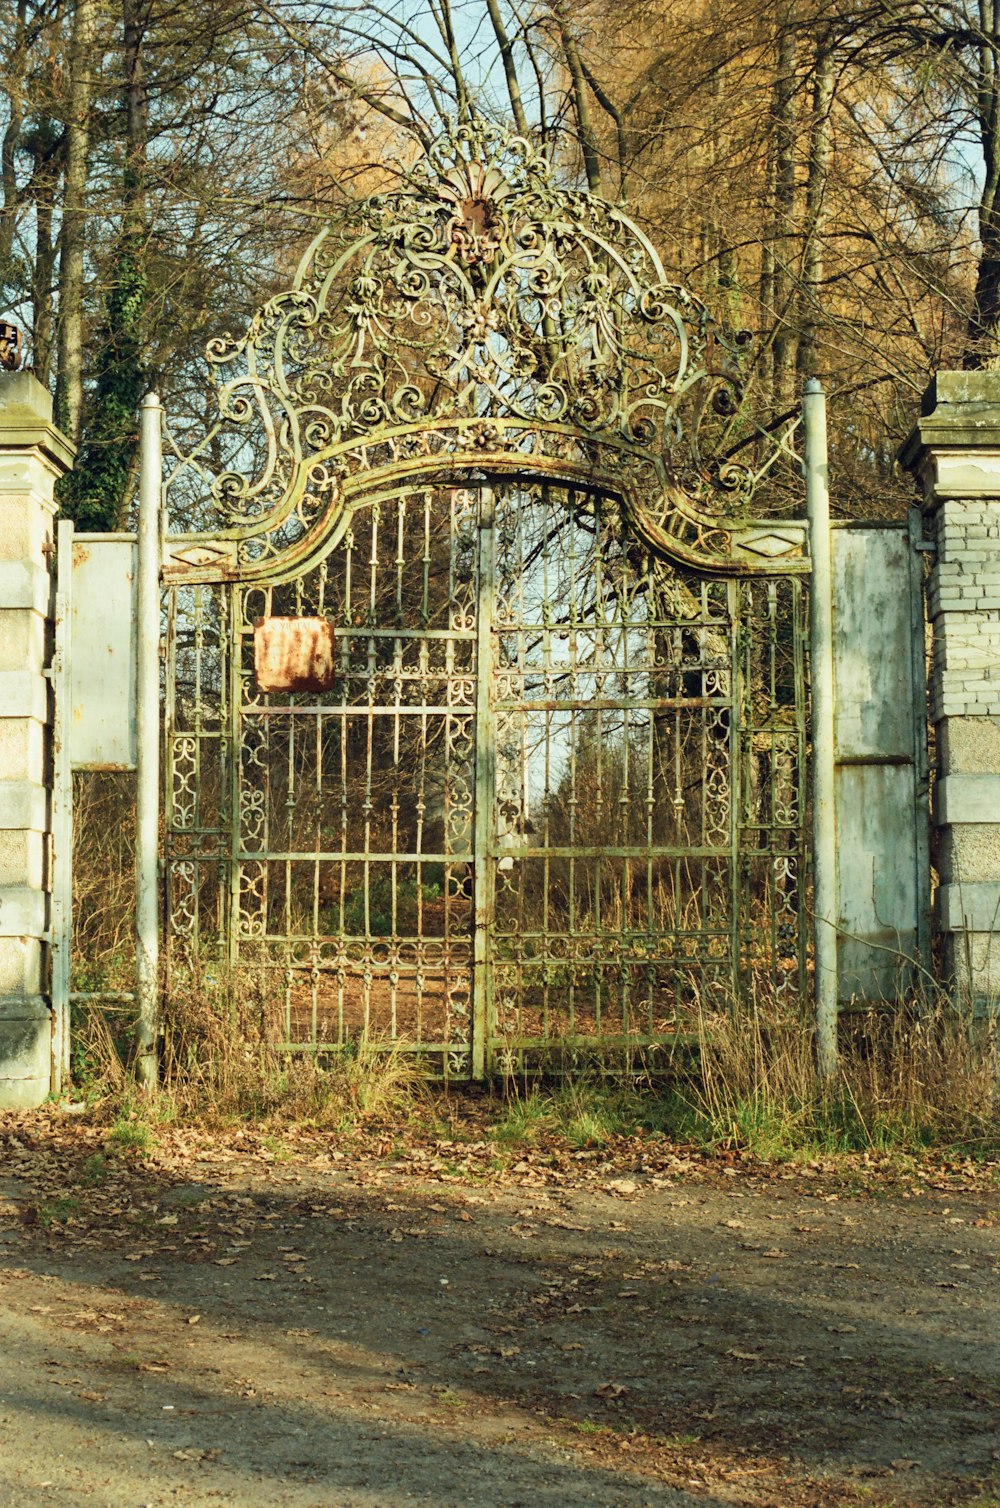 an old gate with a rusted iron design